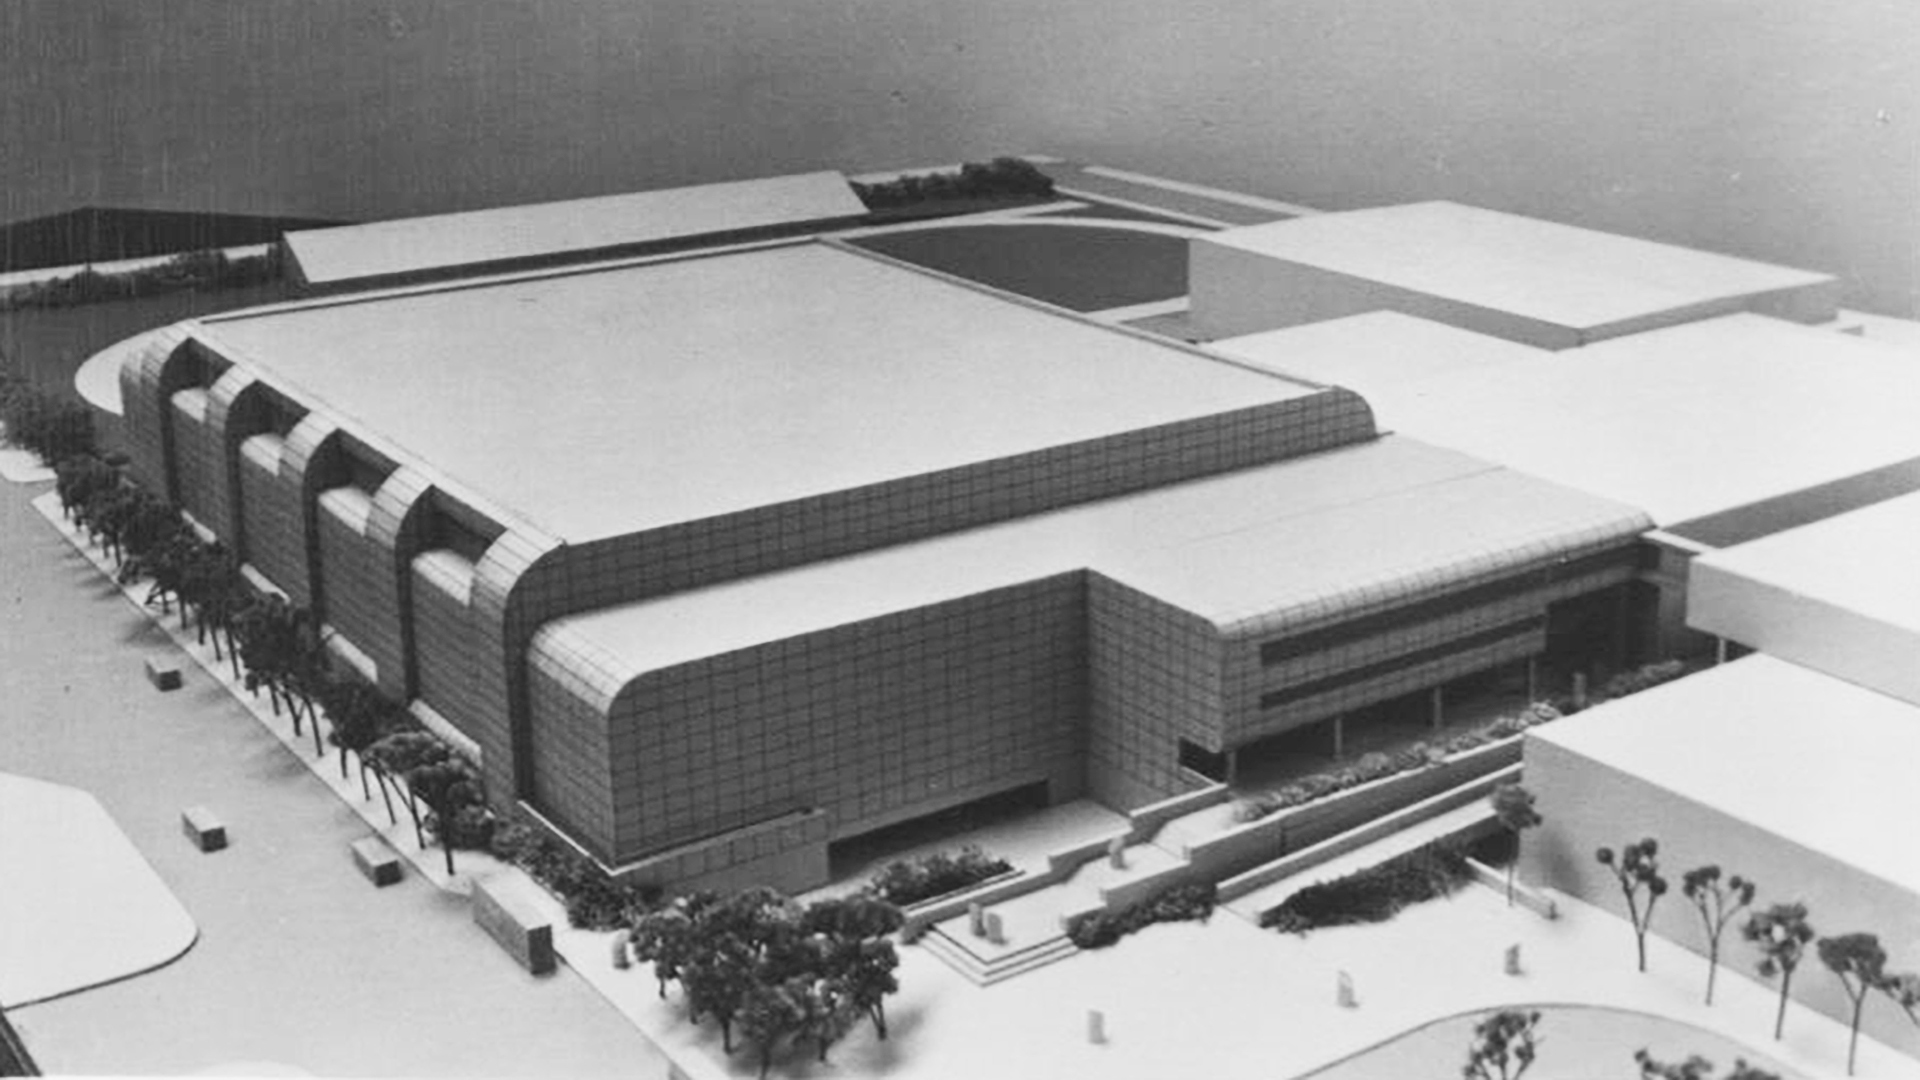 Photograph of a model of the University of Alberta Fieldhouse 1978-1983